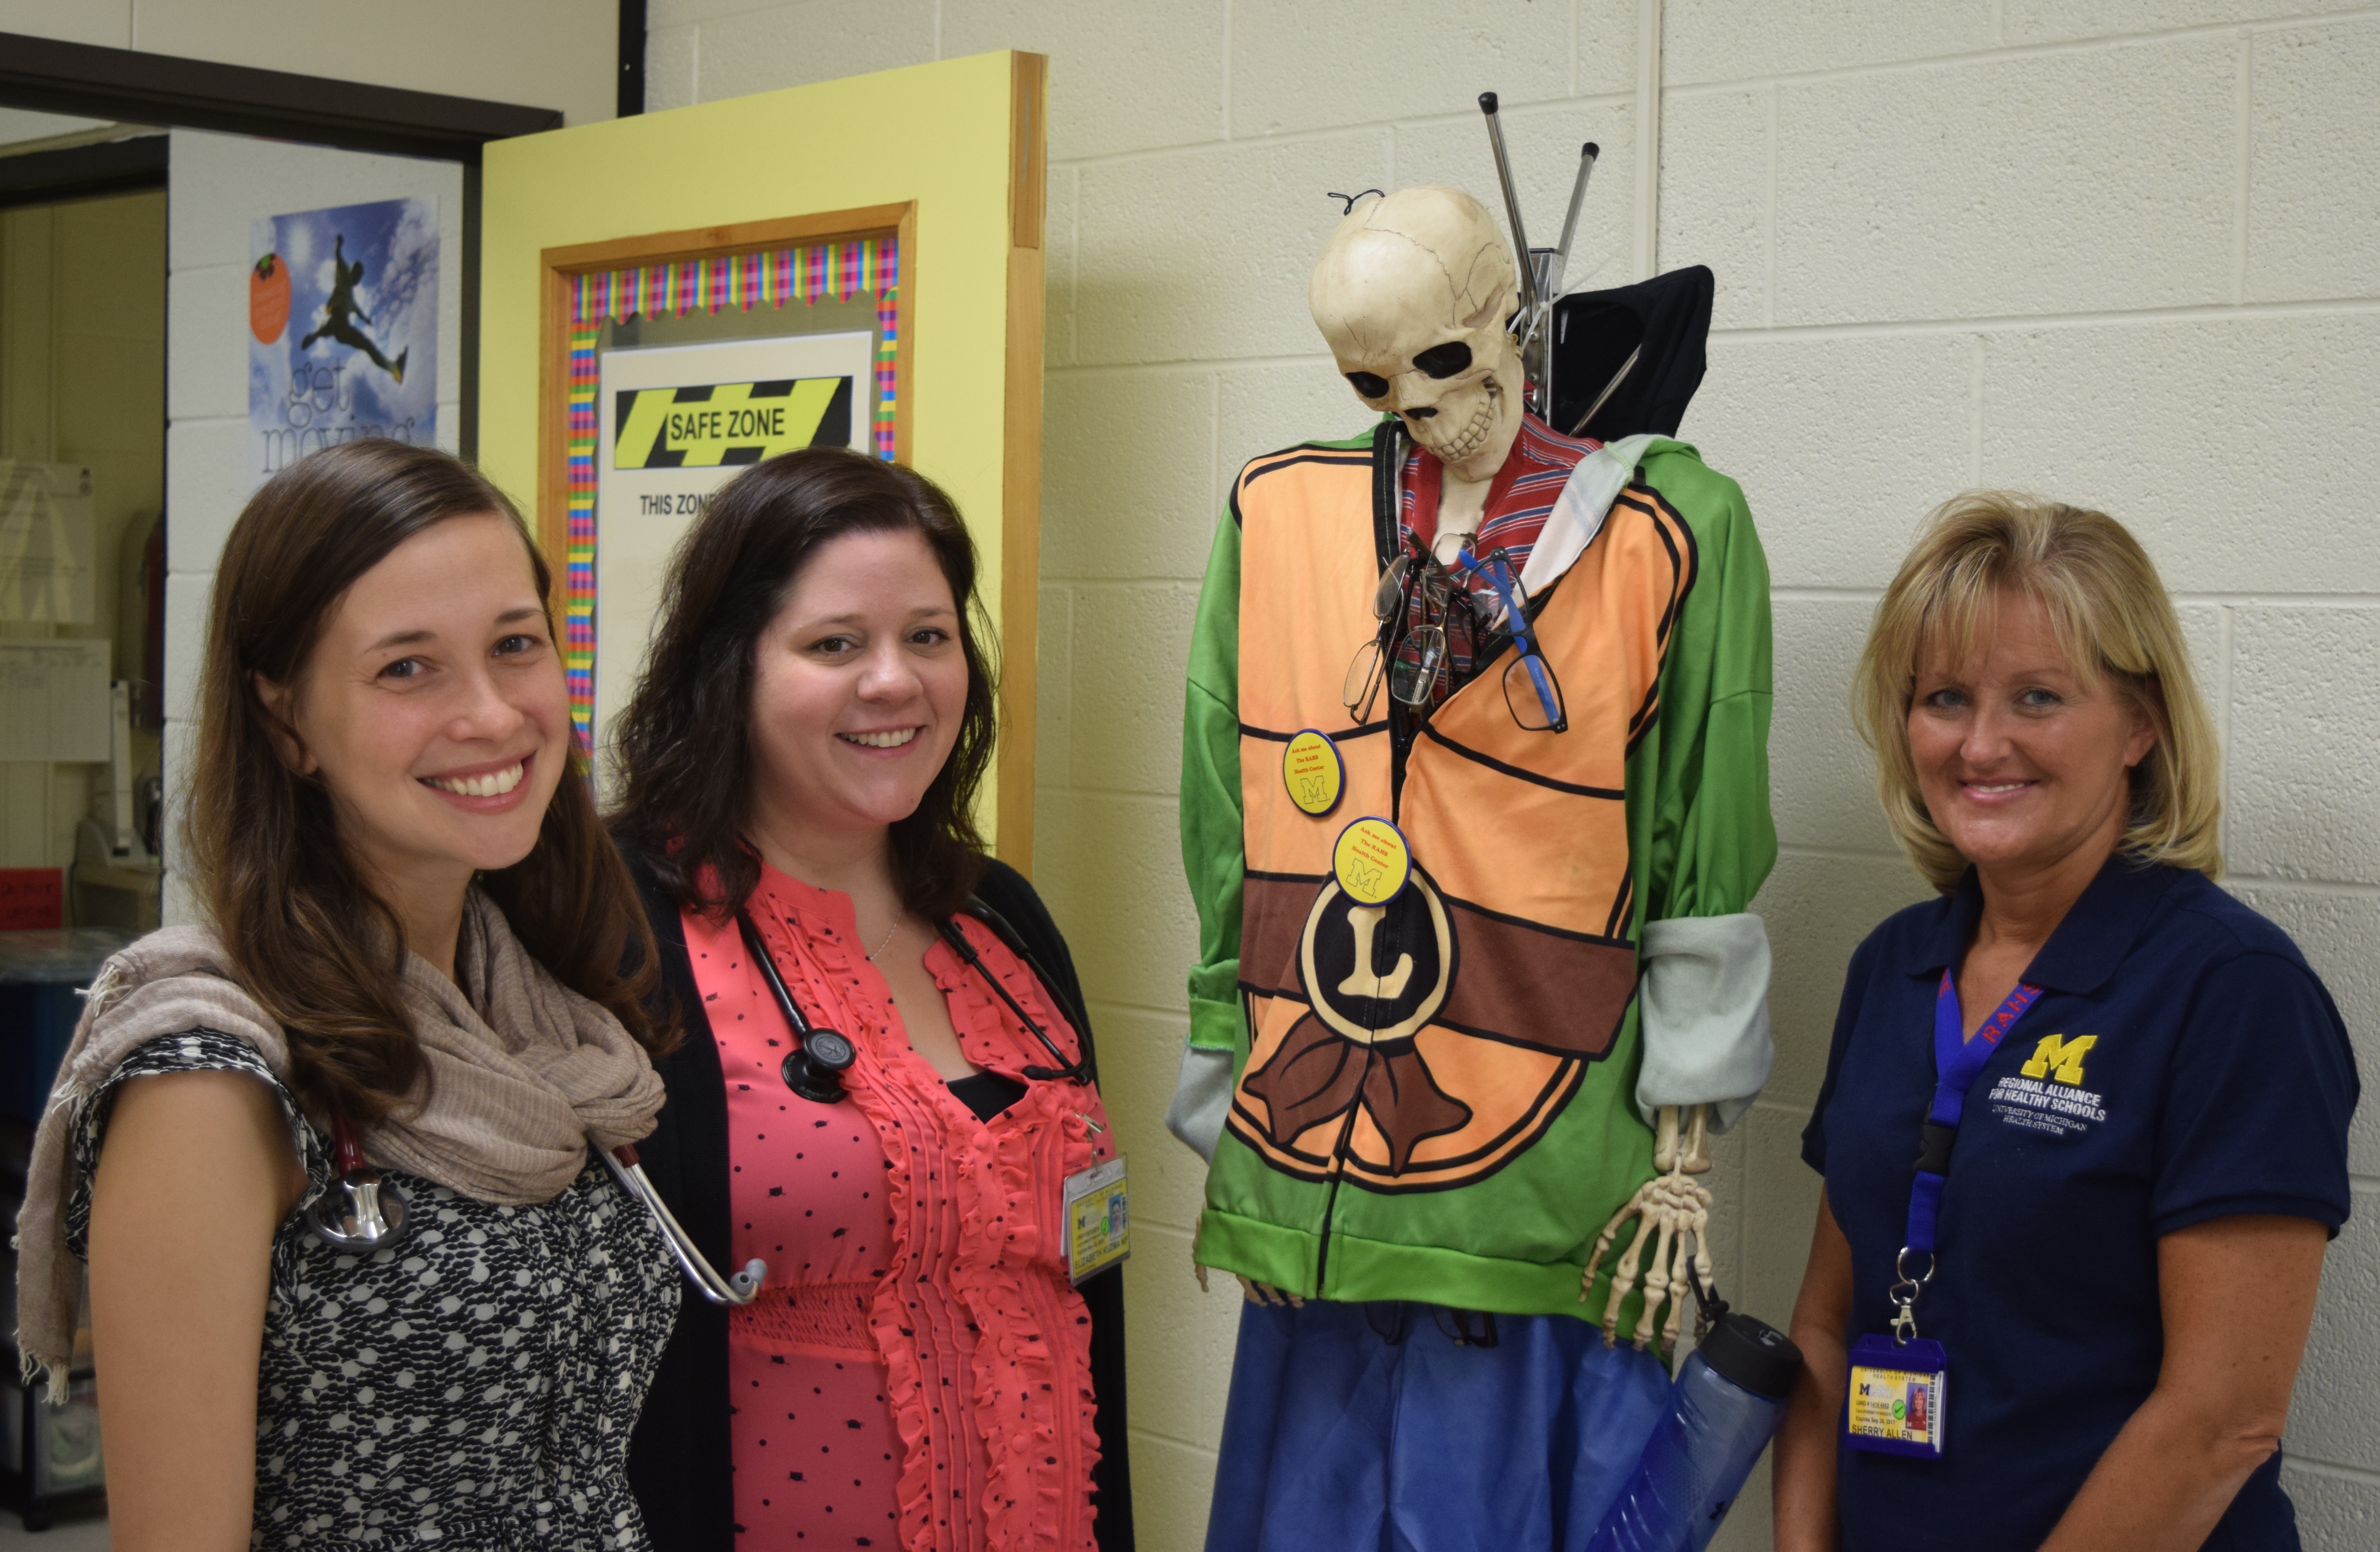 3 staff members at the University of Michigan RAHS Clinic at Scarlett Middle School stand next to a skeleton wearing a Halloween costume